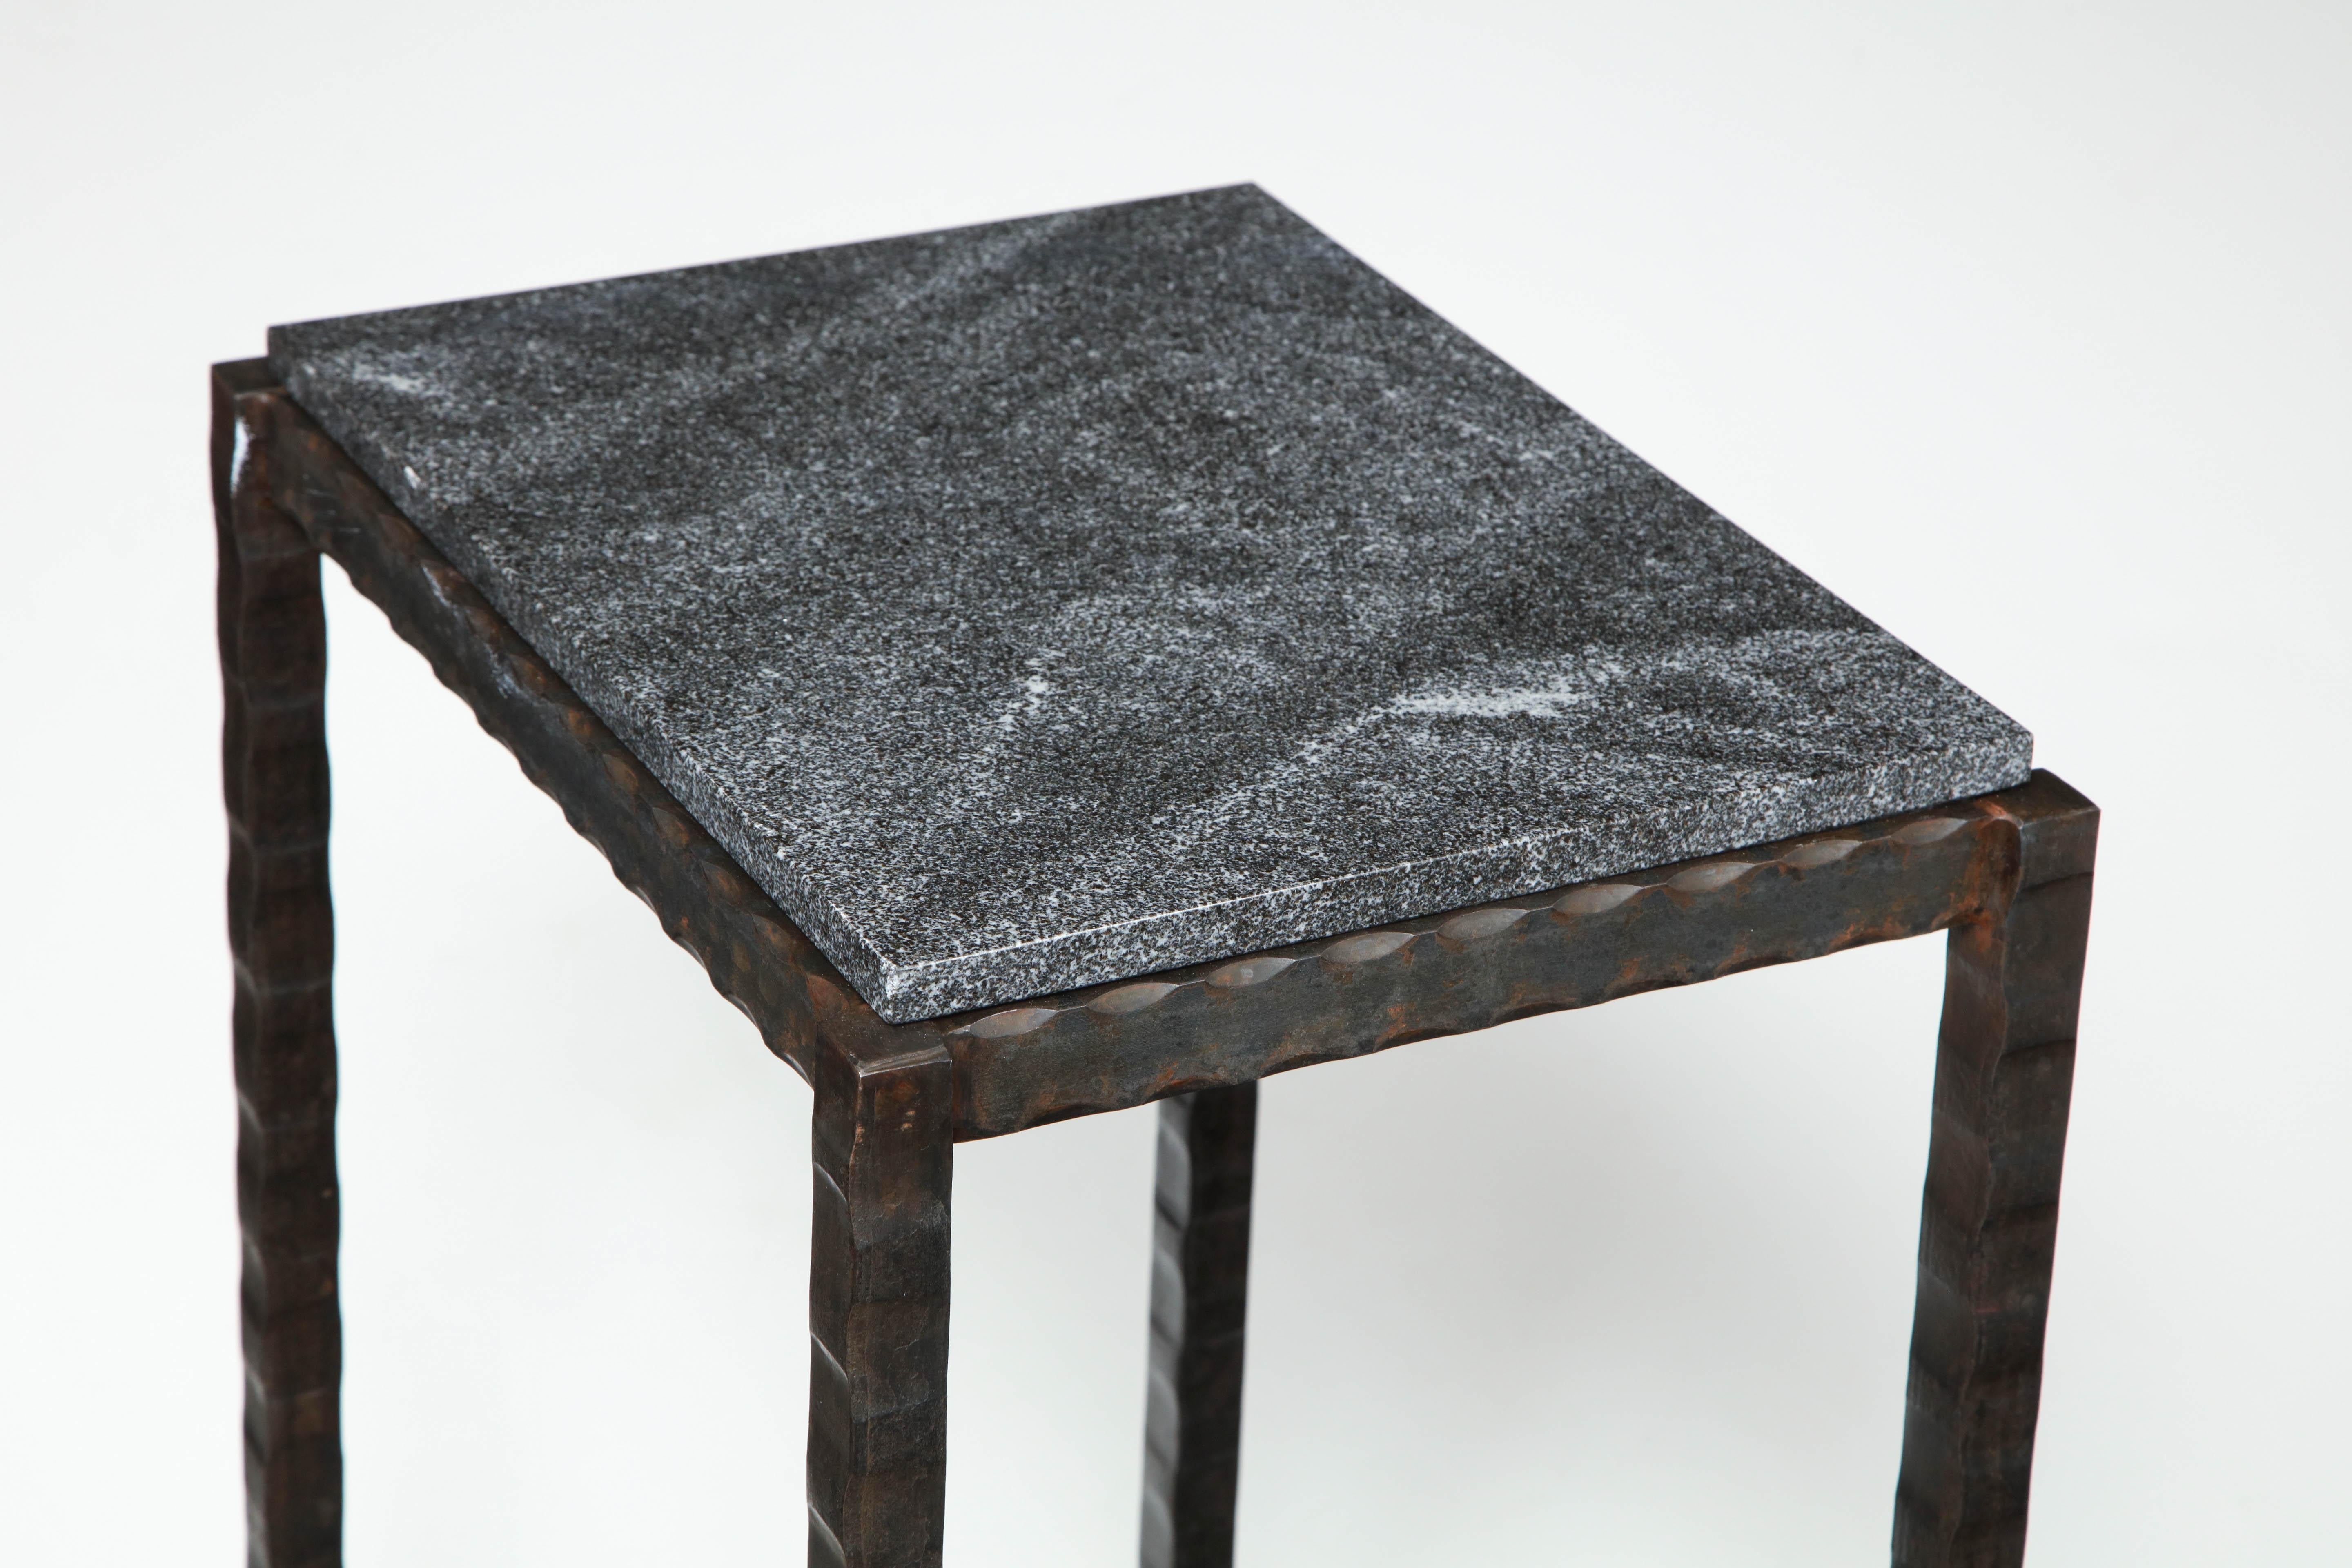 Contemporary Dazzling Granite Side Table in Hammered Steel Frame